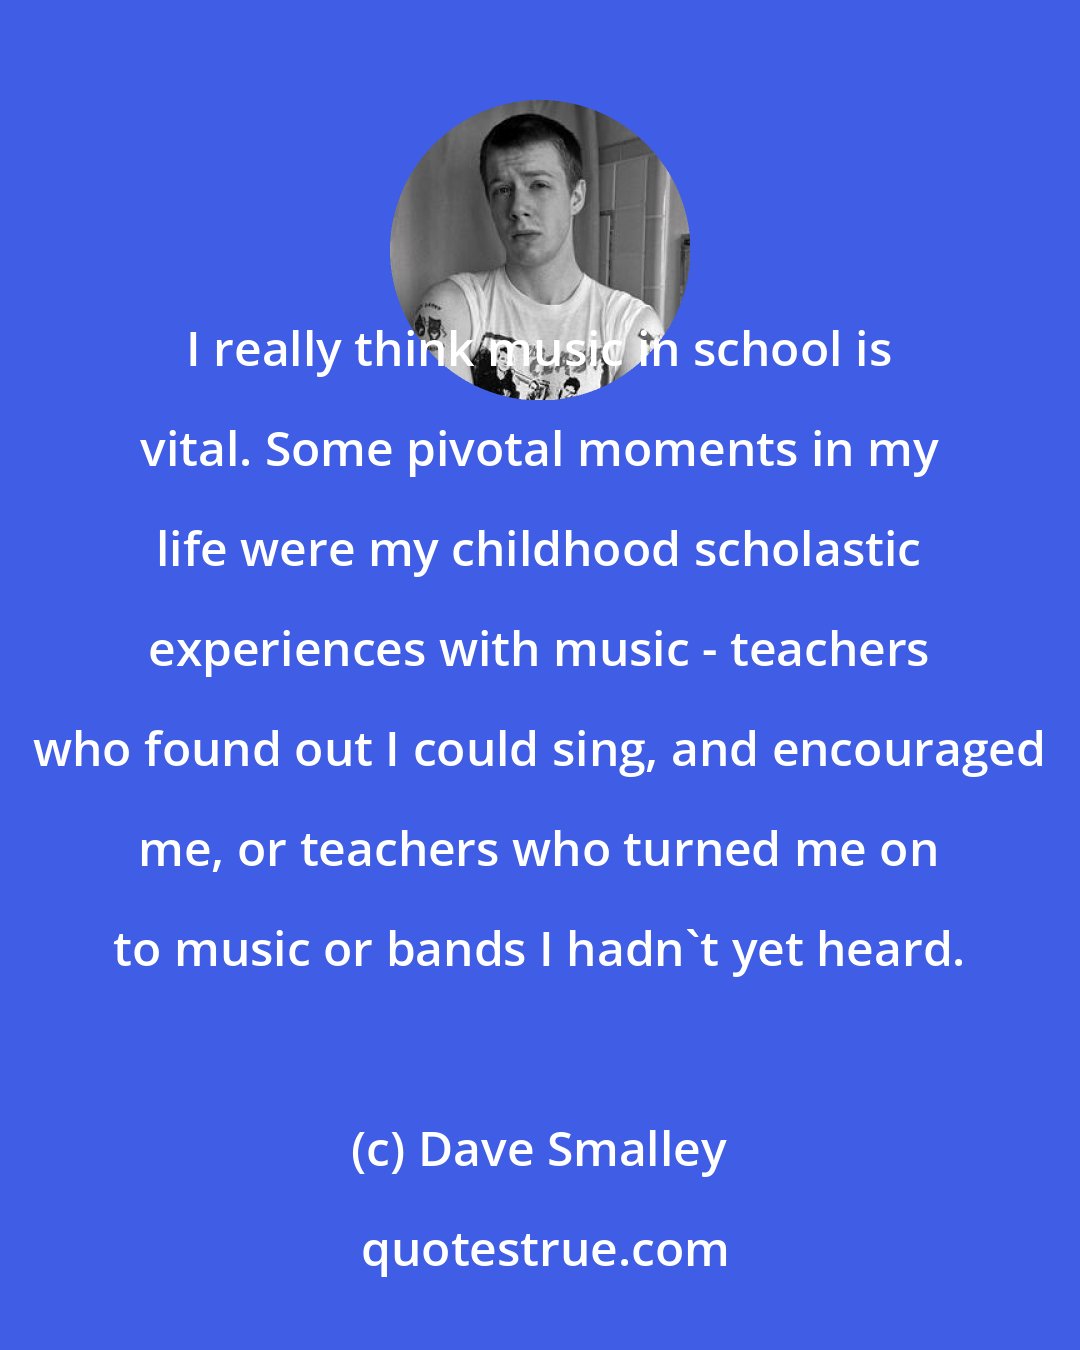 Dave Smalley: I really think music in school is vital. Some pivotal moments in my life were my childhood scholastic experiences with music - teachers who found out I could sing, and encouraged me, or teachers who turned me on to music or bands I hadn't yet heard.